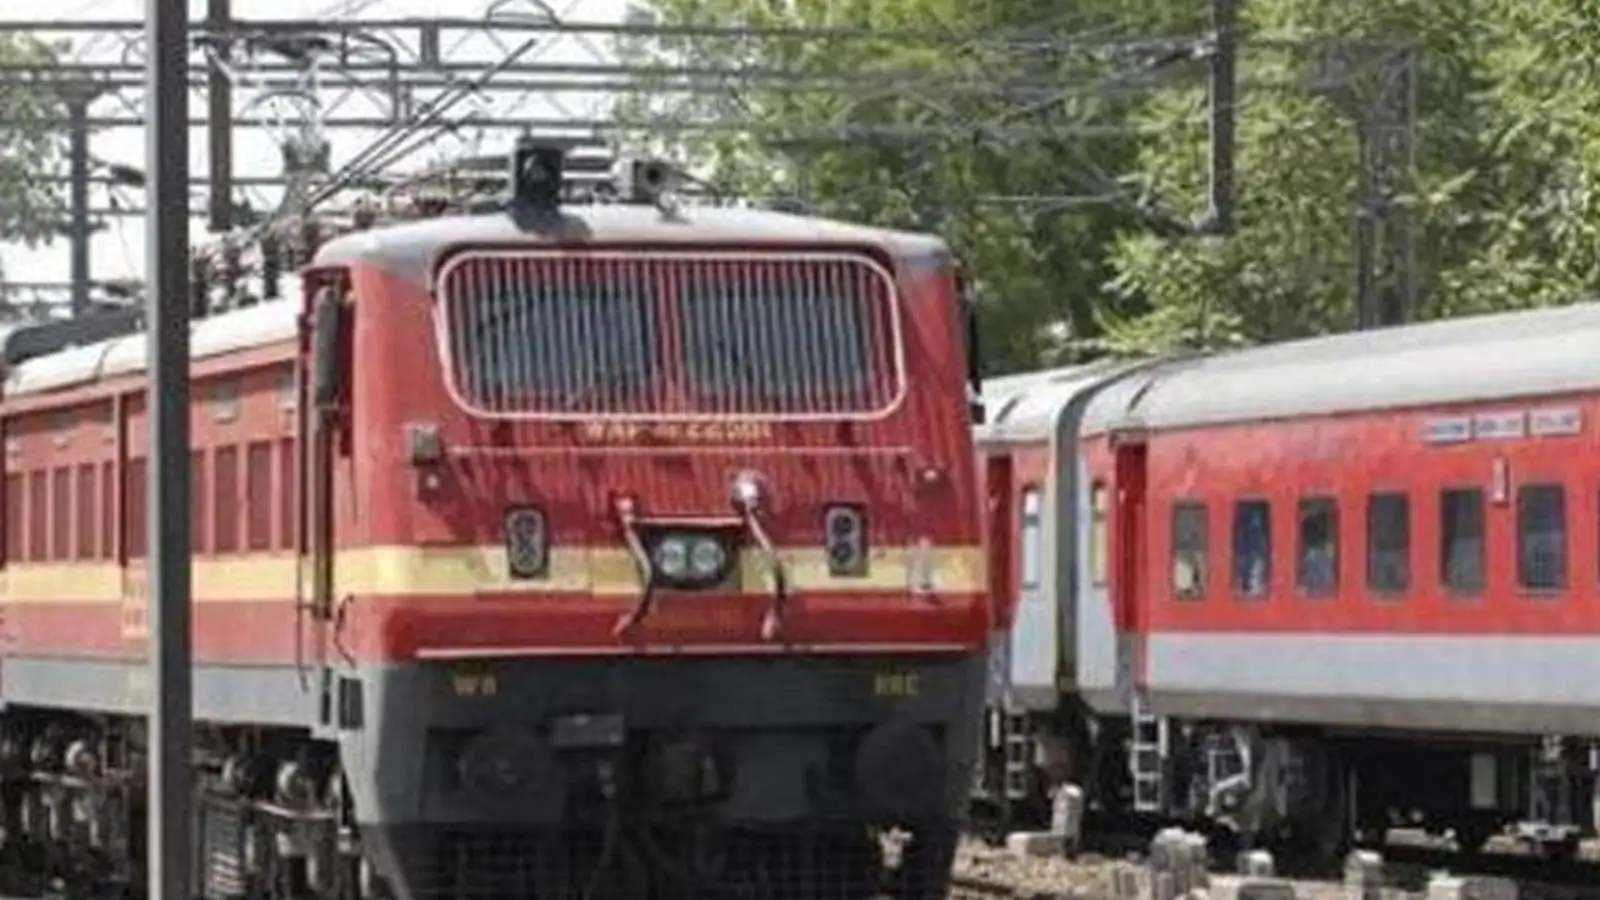 Railways invites bids for hydrogen fuel-based technology for diesel-run trains | Latest News India